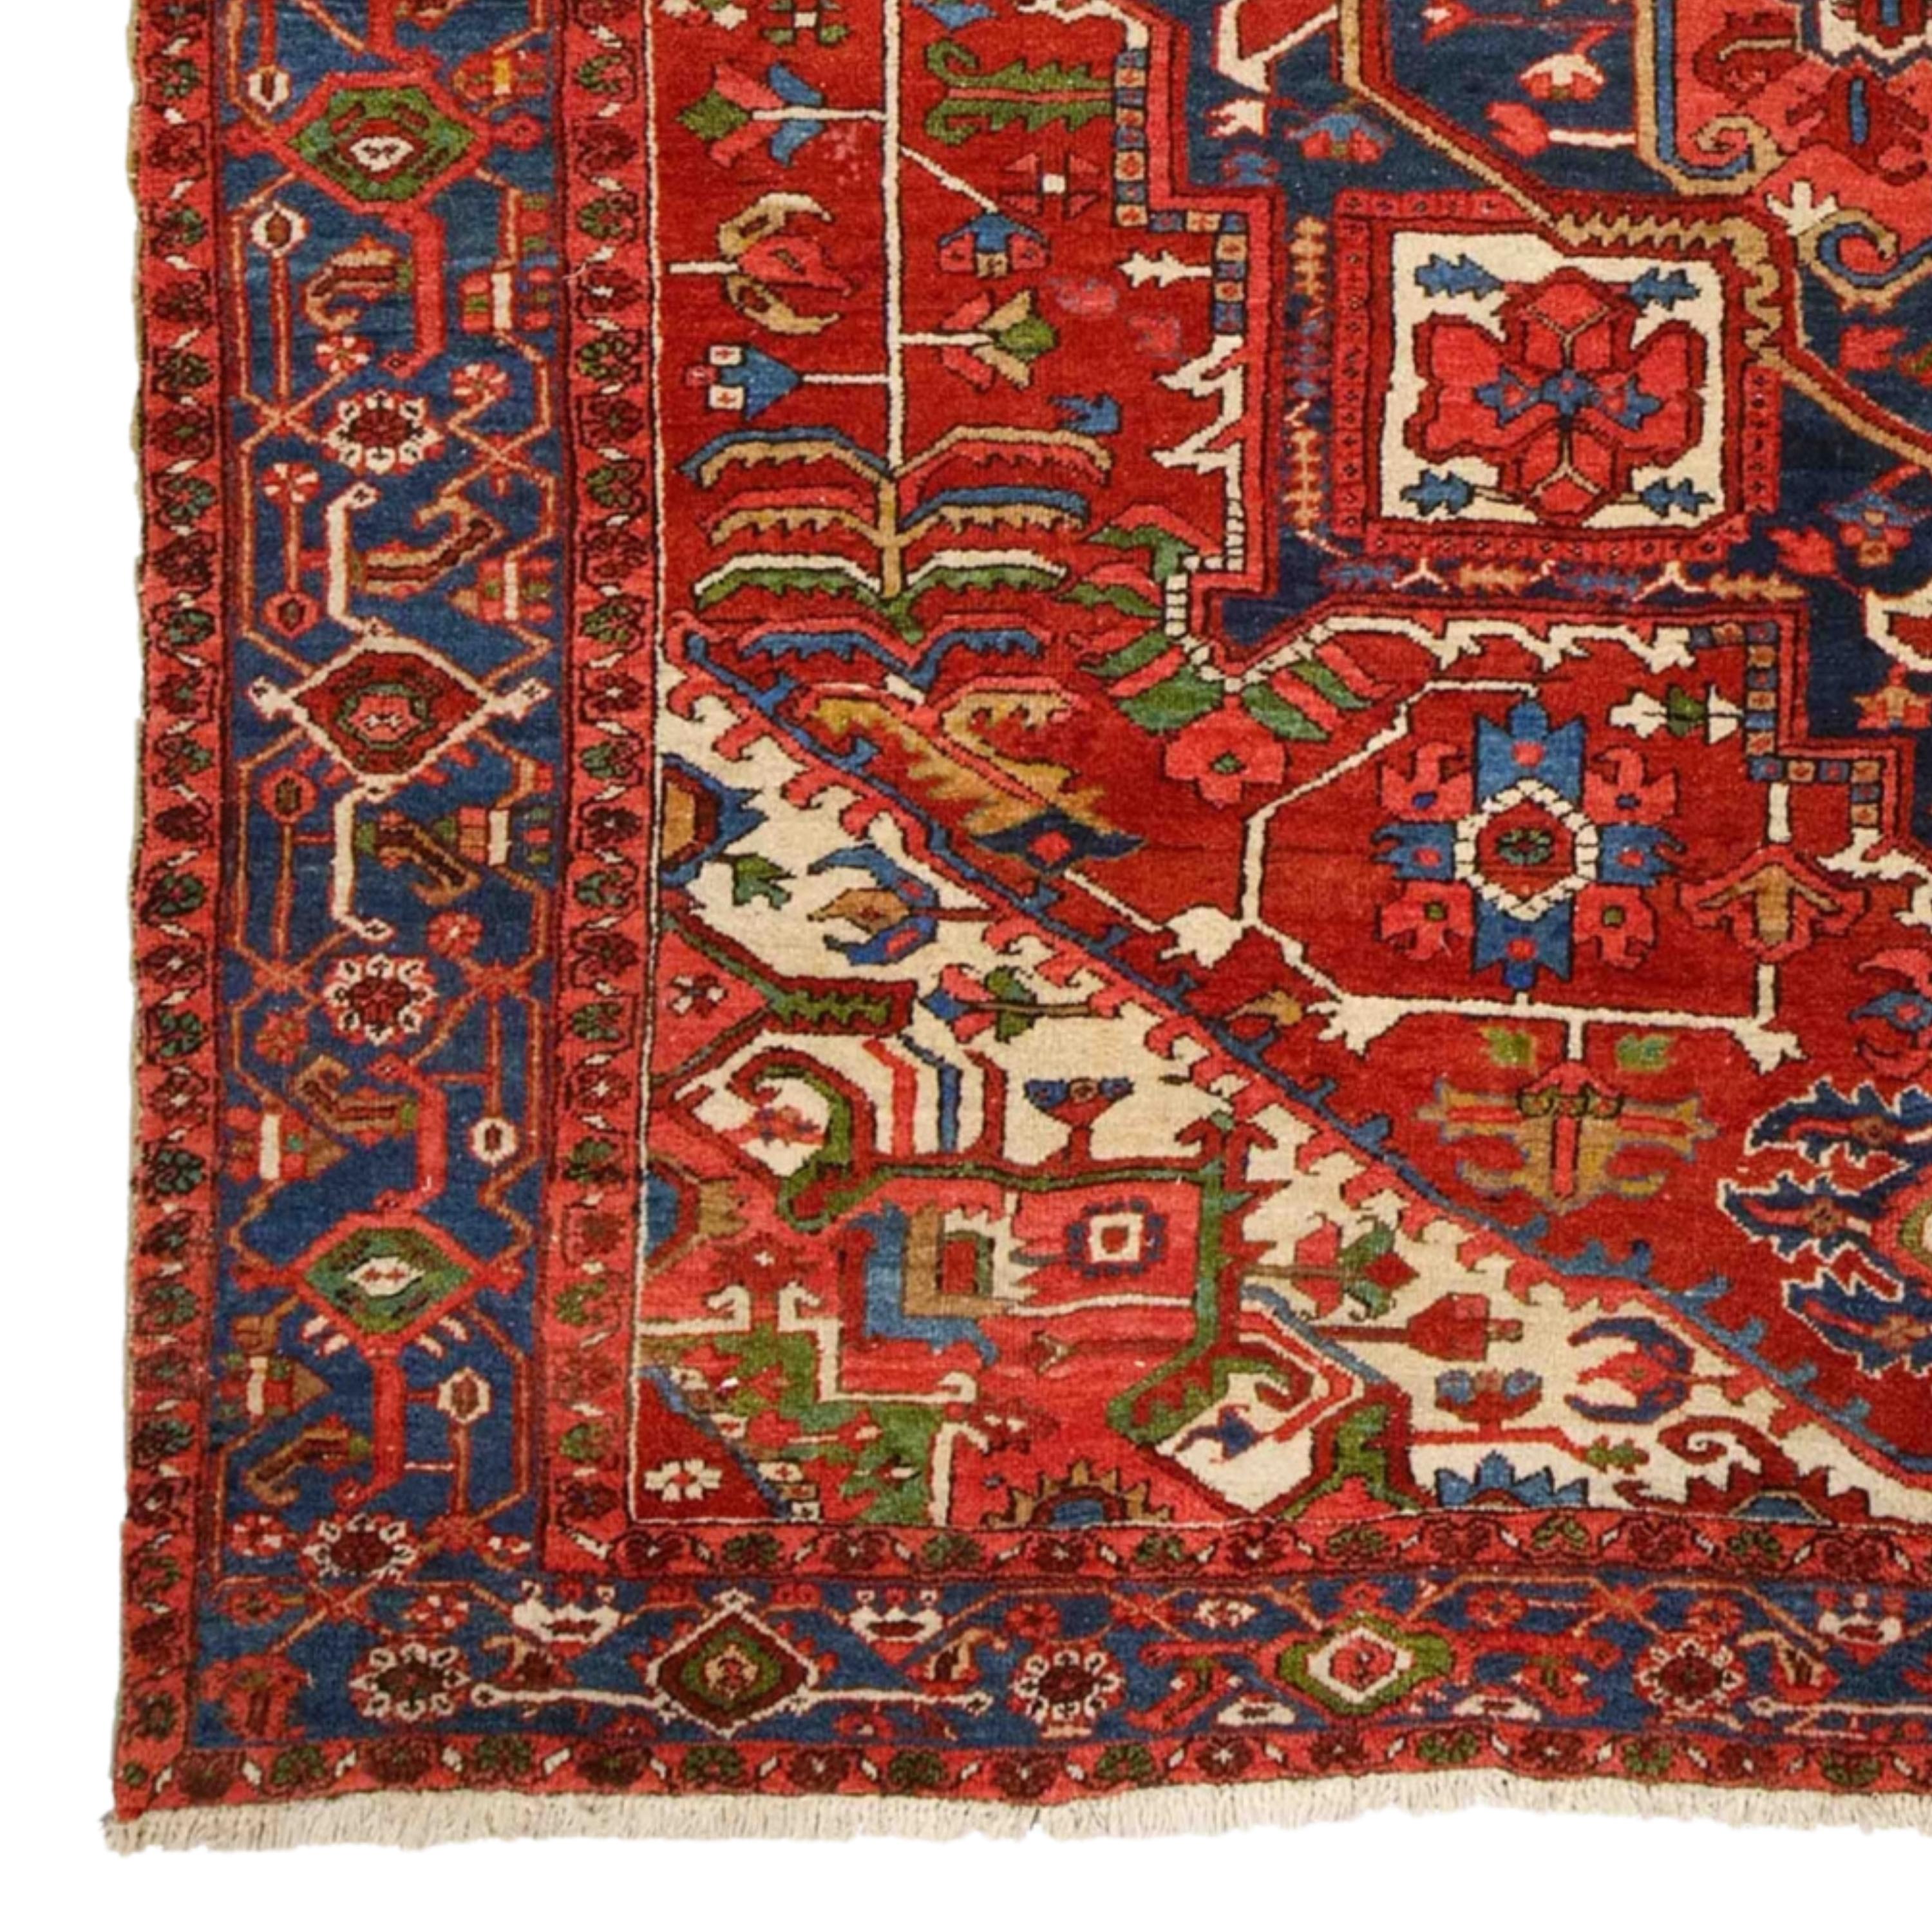 19th Century Heriz Carpet

This magnificent 19th-century antique Heriz rug is a masterpiece that weaves the history, art and culture of its time into its intricate patterns. Each stitch tells a story, with skilled craftsmen meticulously crafting